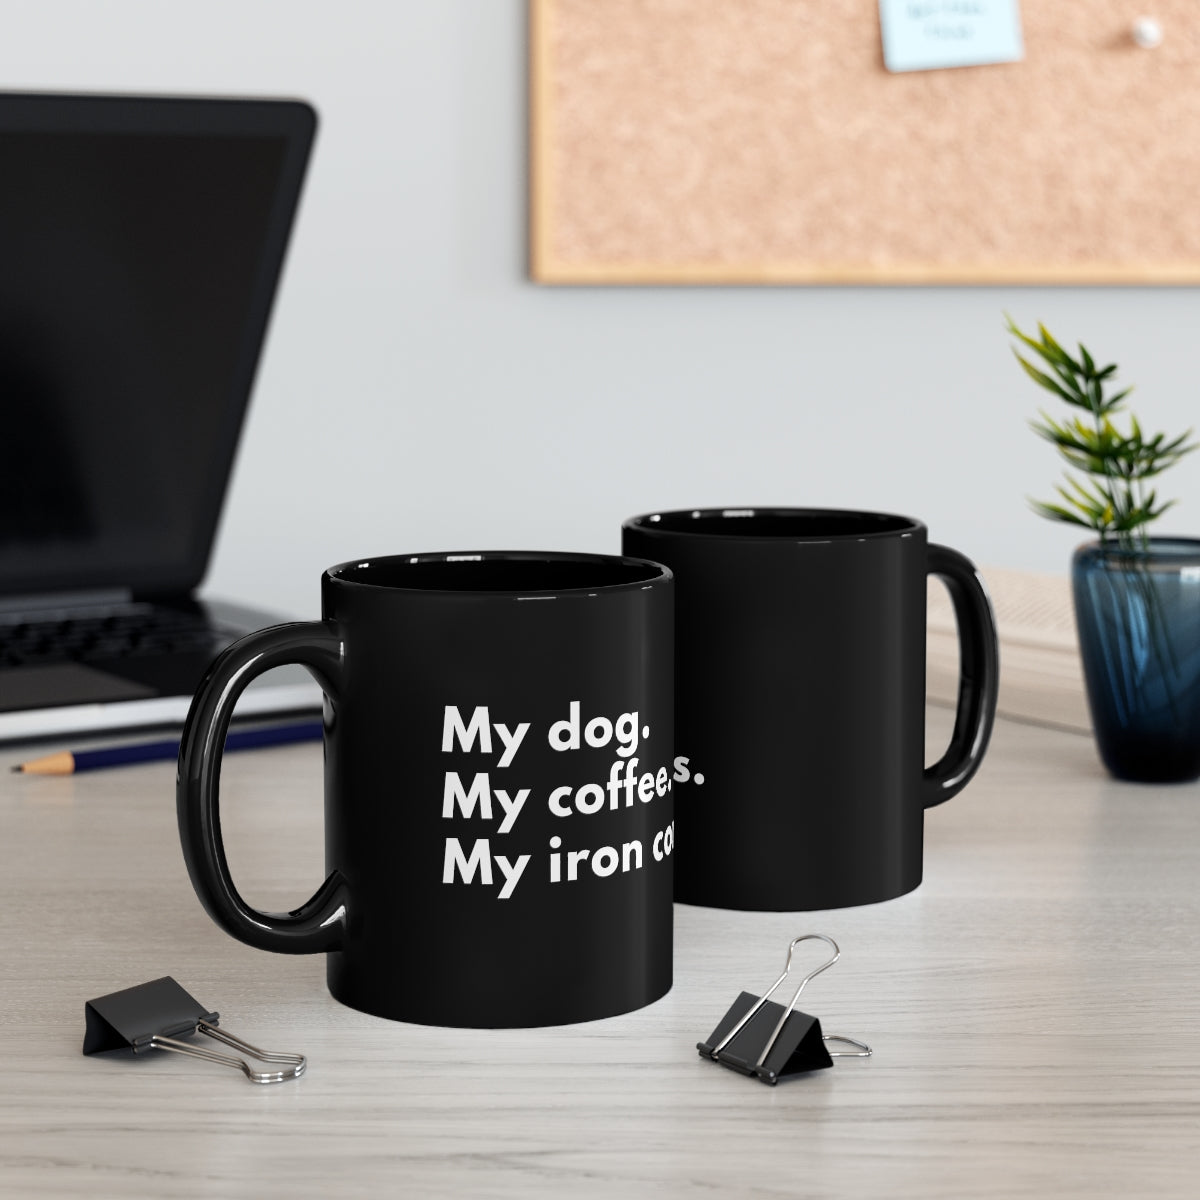 black ceramic mug, C shaped handle, My Dog. My Coffee. My Iron Condor, for dog lovers and for traders